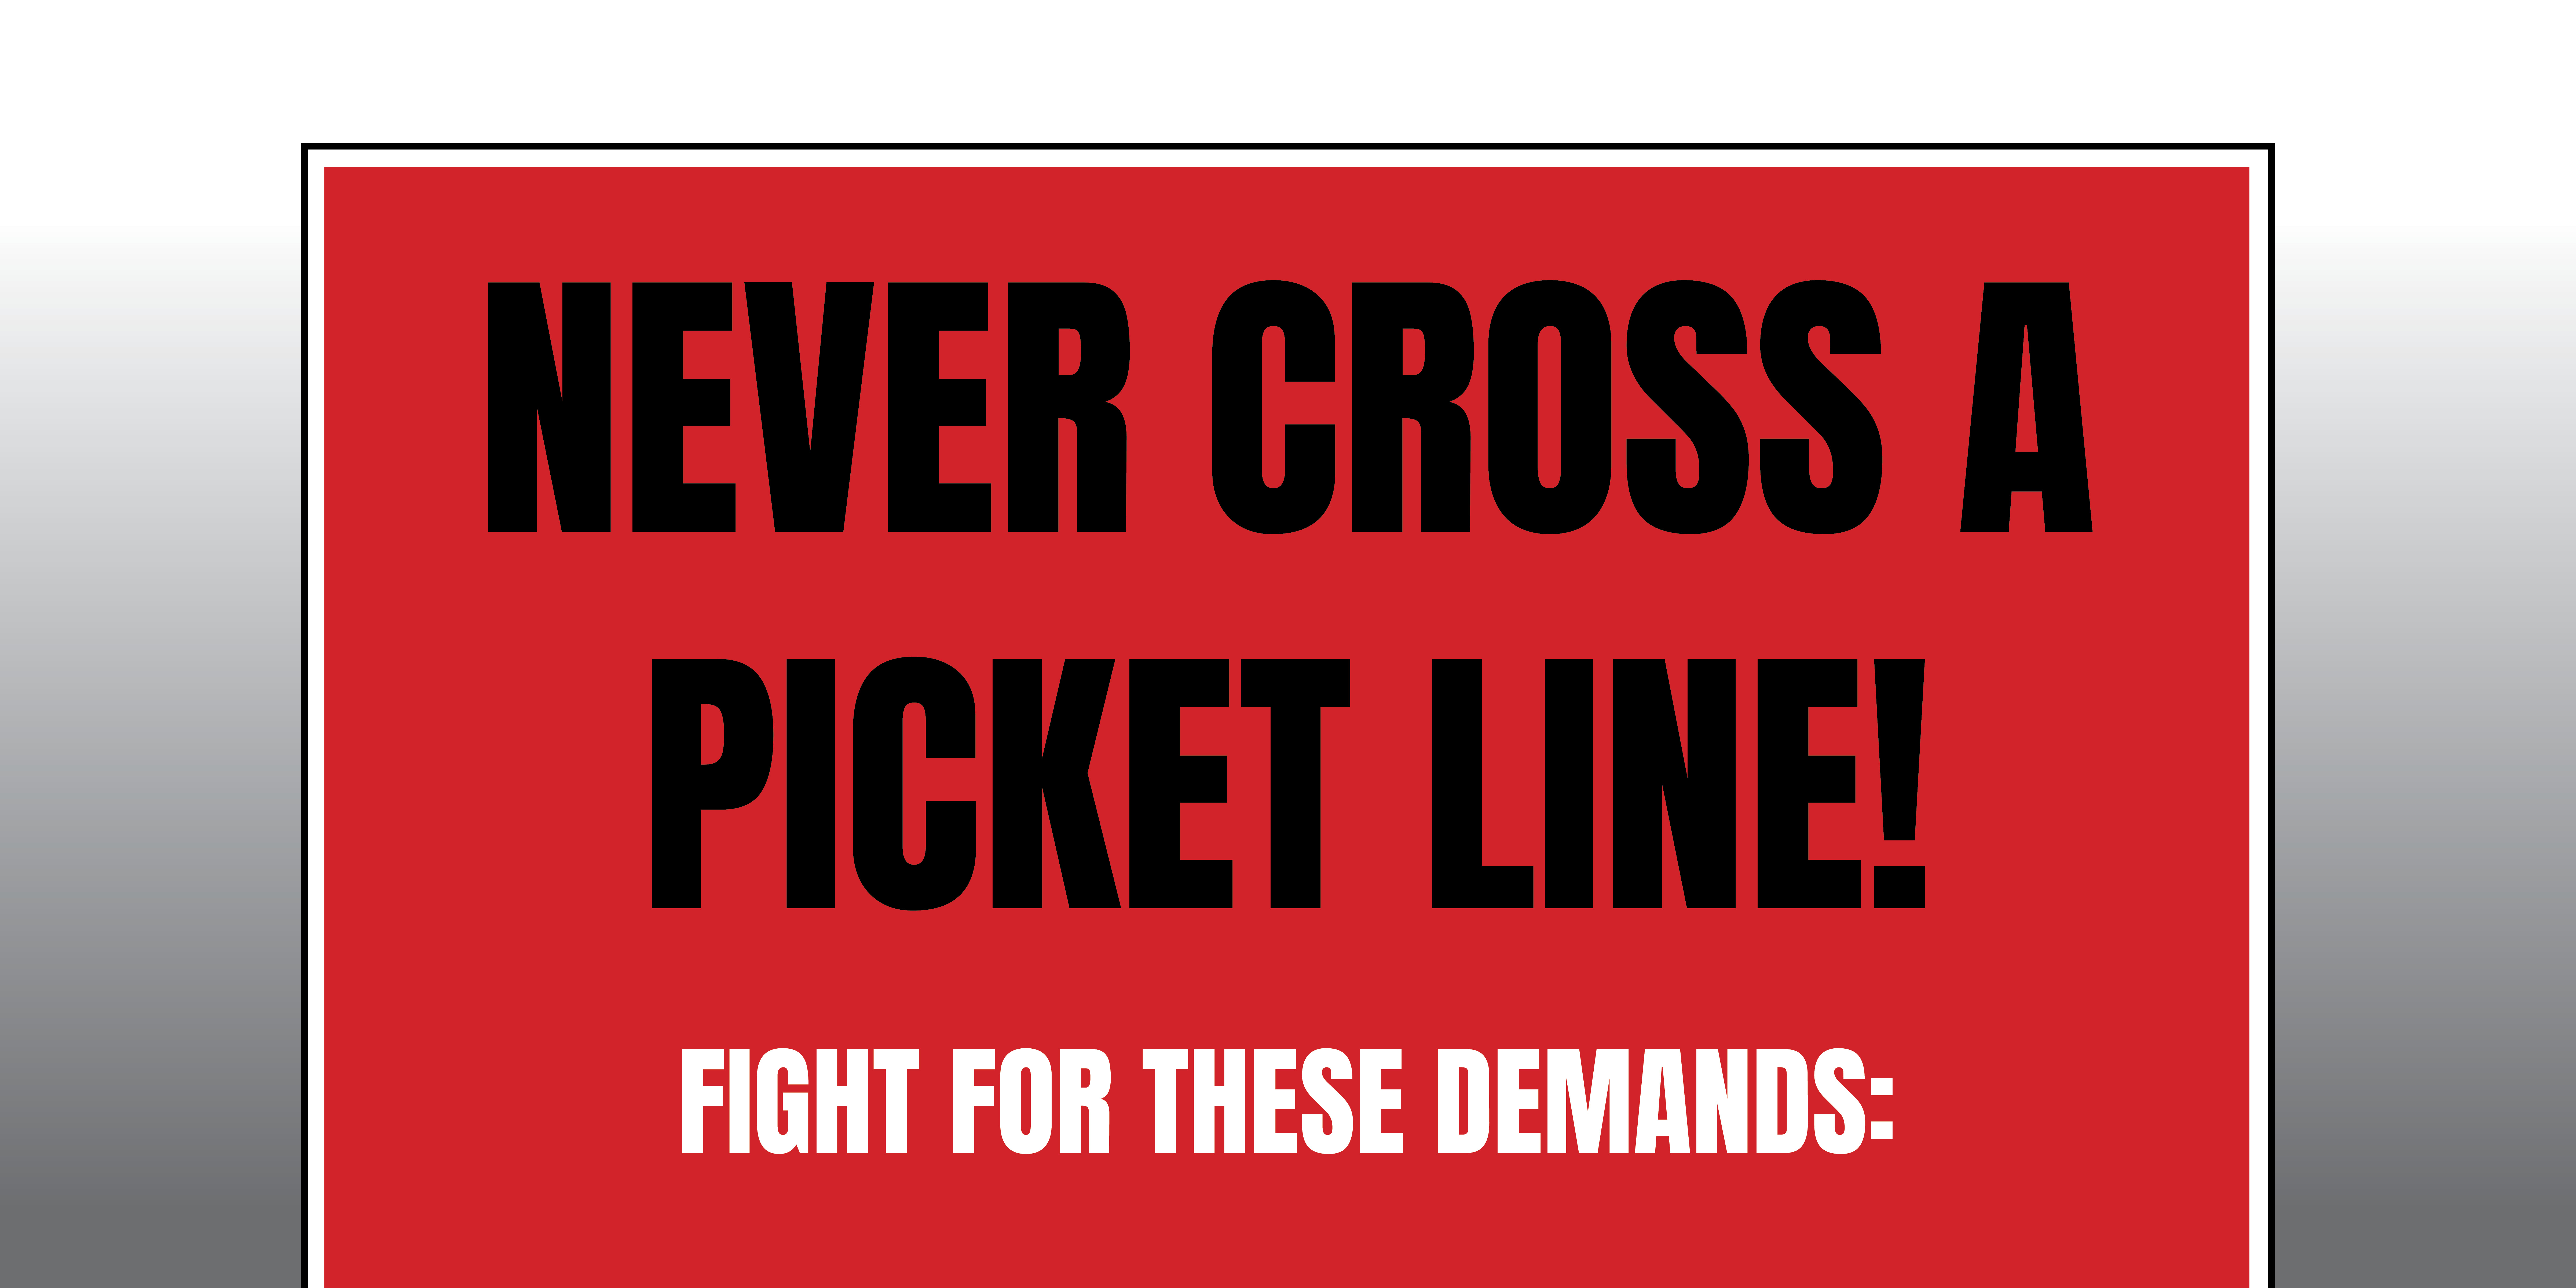 BUILD PICKET LINES - DON'T CROSS THEM!